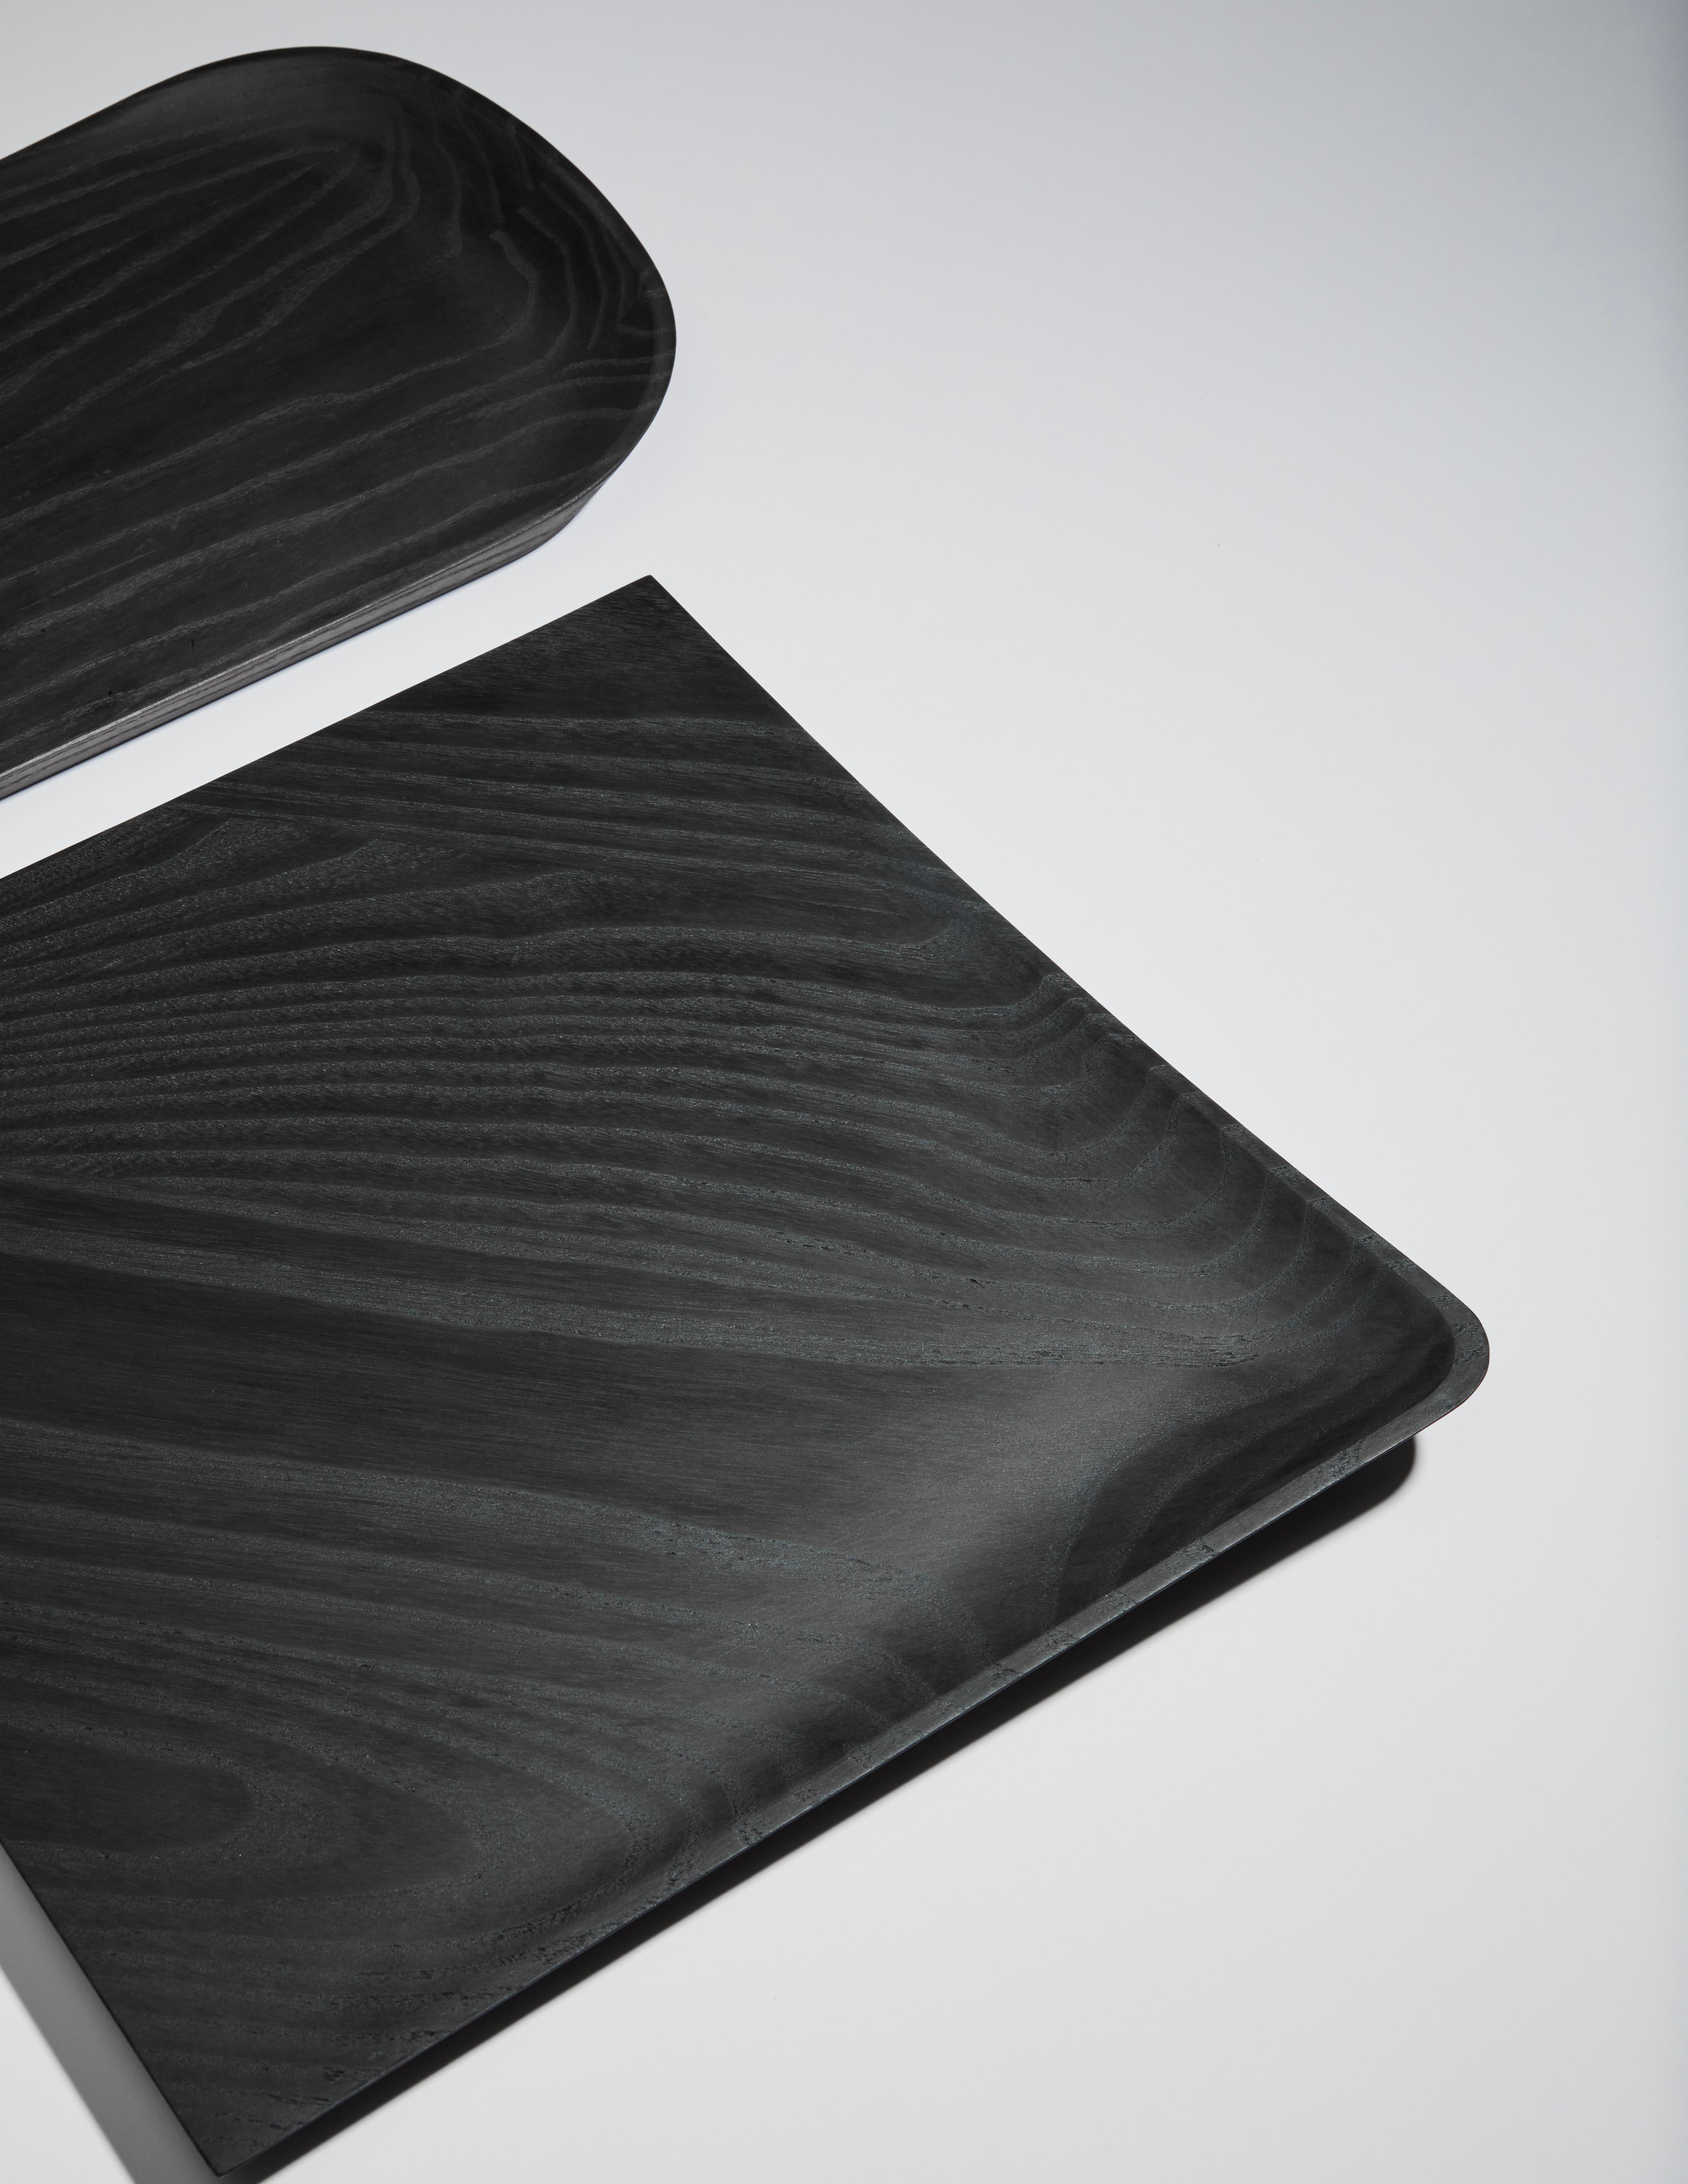 A set of 3 Creux Trays by Clemence Birot
Dimensions: 33 x 32 cm; 39 x 22 cm; 22 x 19,5 cm. 
Materials: ash (black stained).

Clemence Birot started her career in Copenhagen, Denmark, and discovered a design practice closely related to